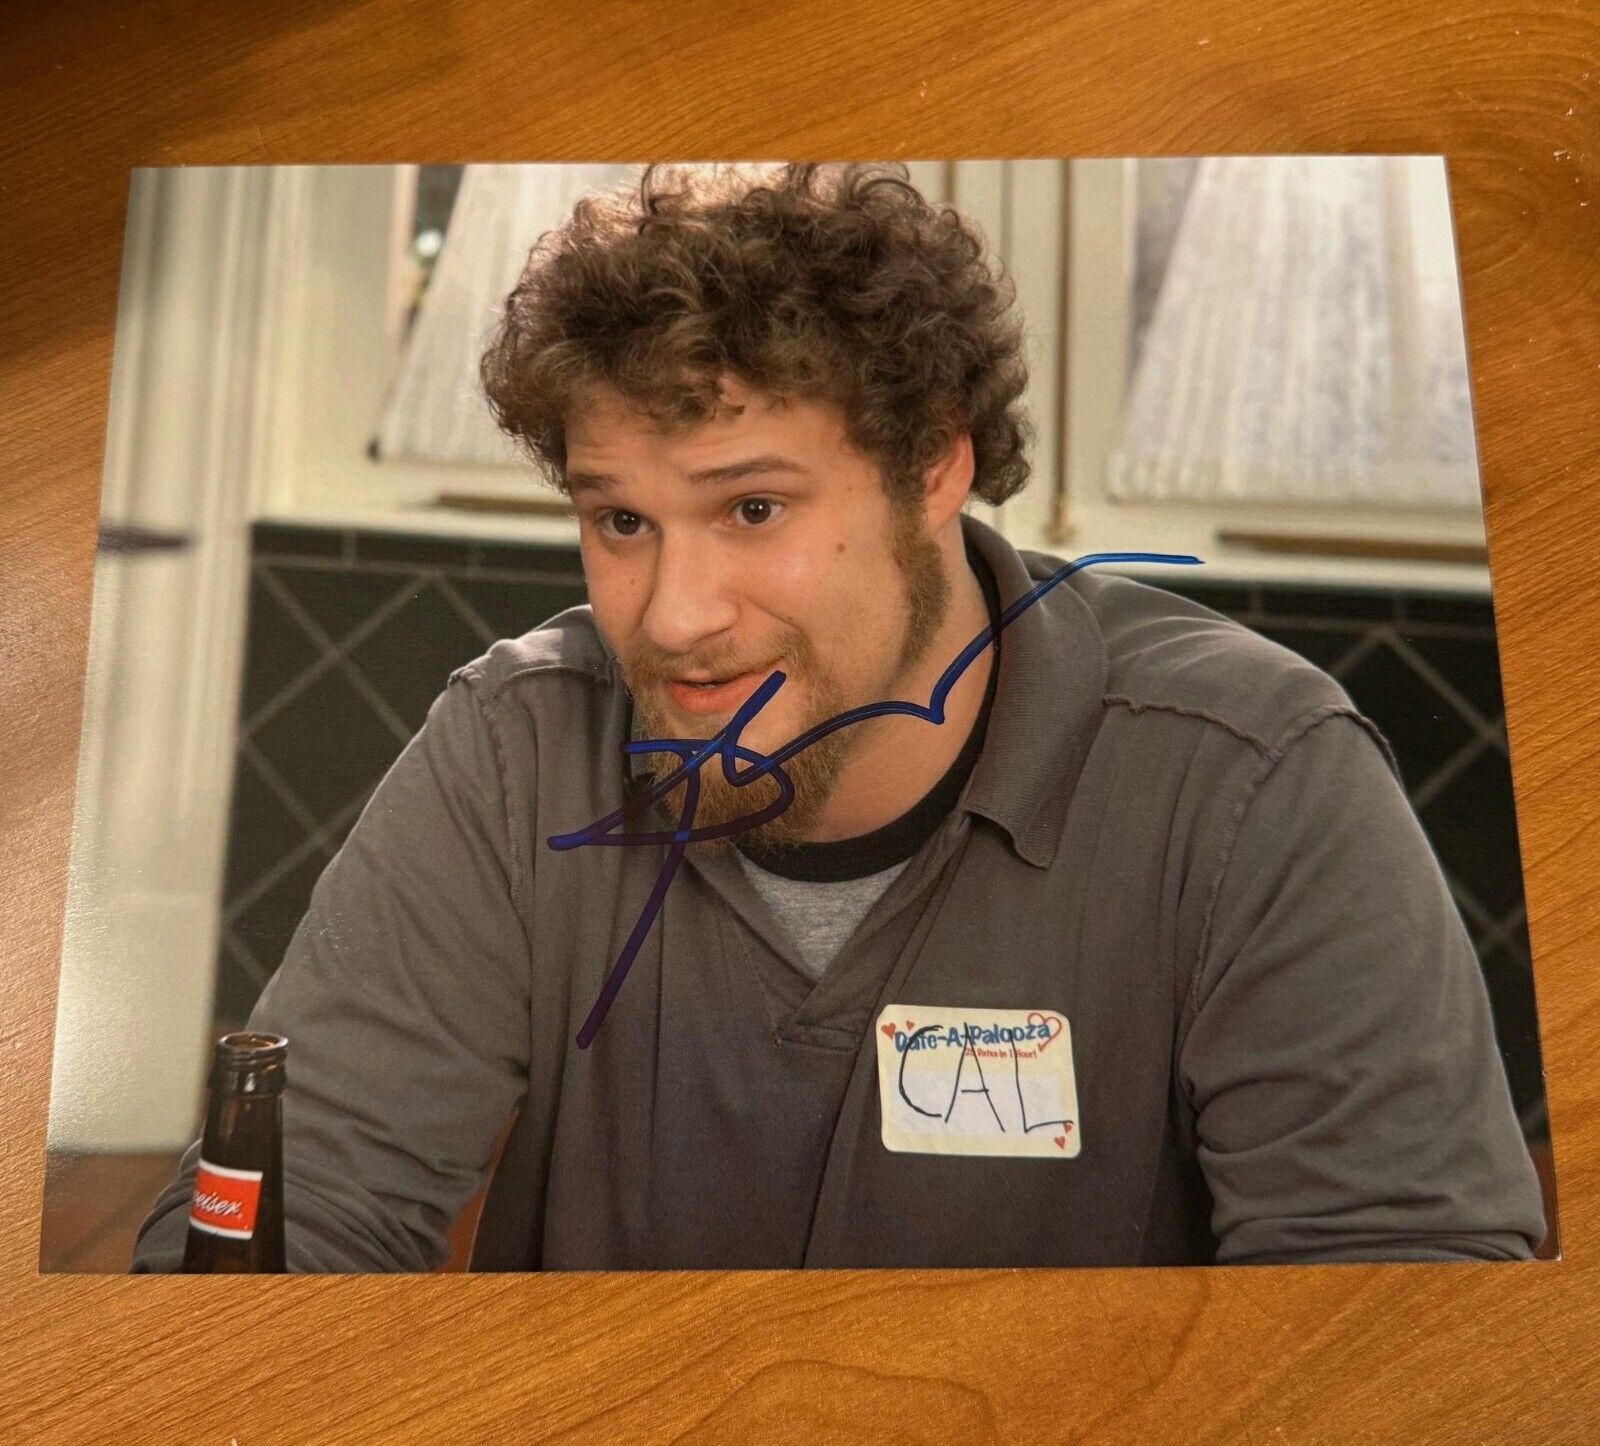 SETH ROGEN Autographed 8x10 Photo SIGNED AUTO 40 Year Old Virgin